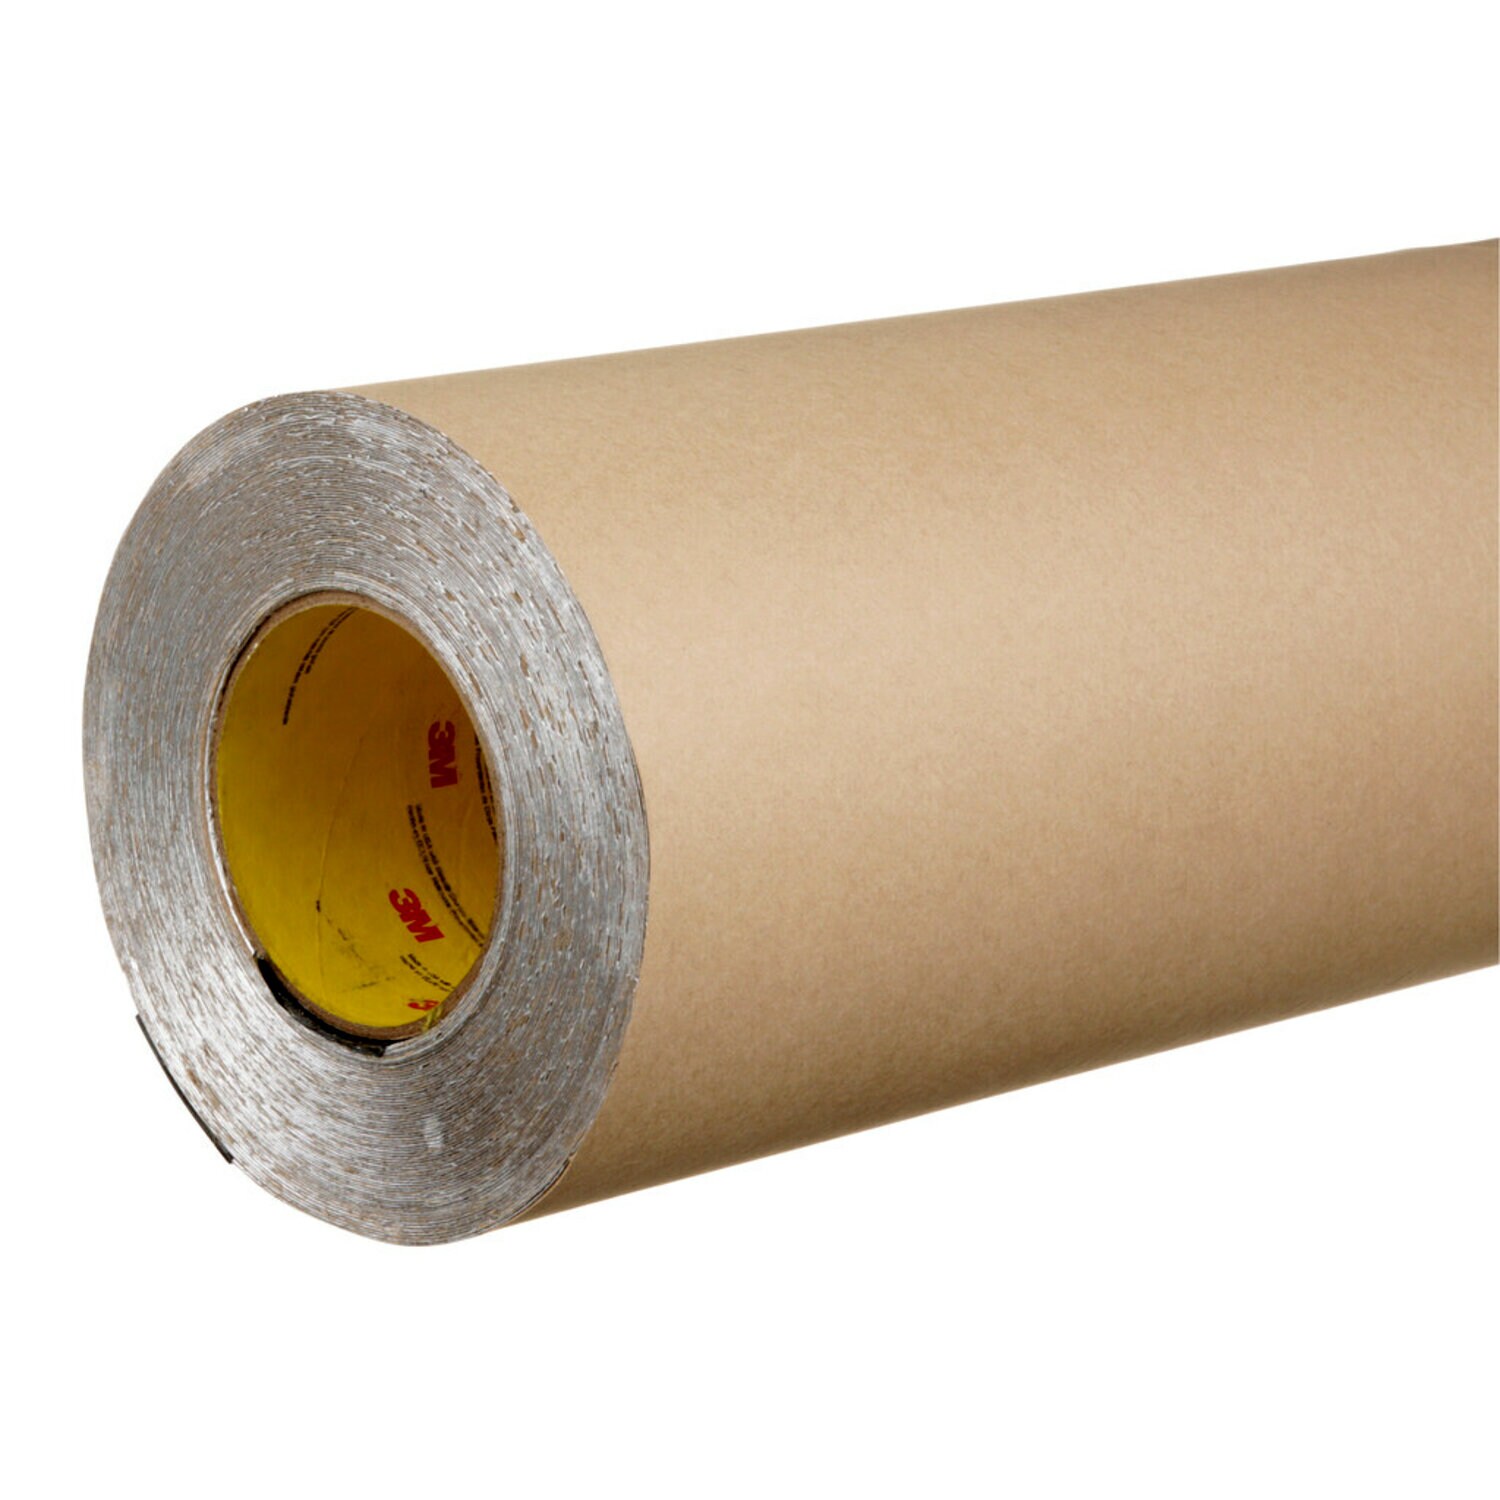 7100214292 - "3M VentureClad Plus Insulation Jacketing Tape Embossed
1579GCW-E,
Natural, 30 in x 25 yd, 1 Roll/Case"